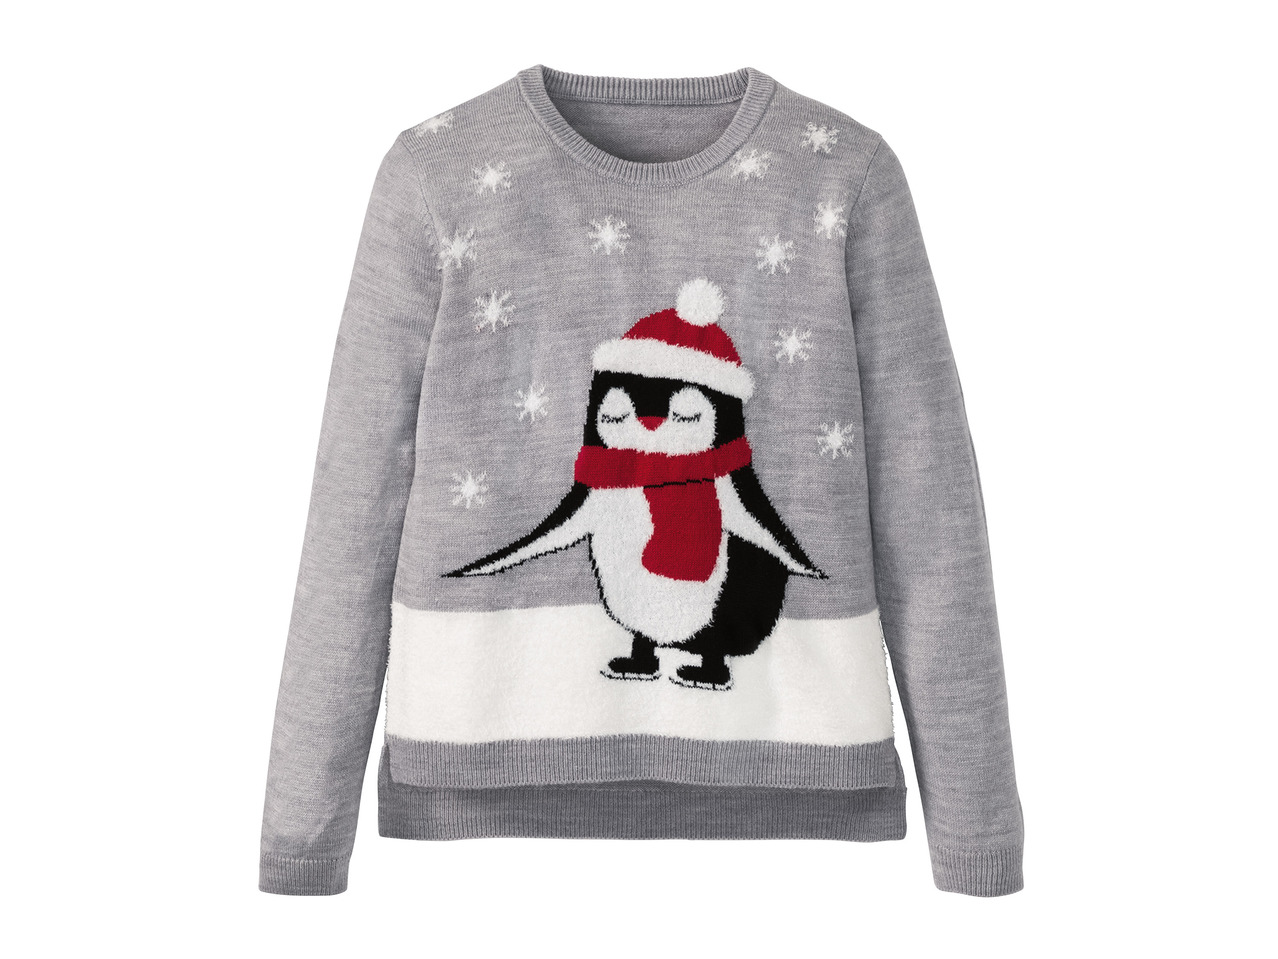 PEPPERTS(R) Julesweater - Lidl — Danmark - Specials archive